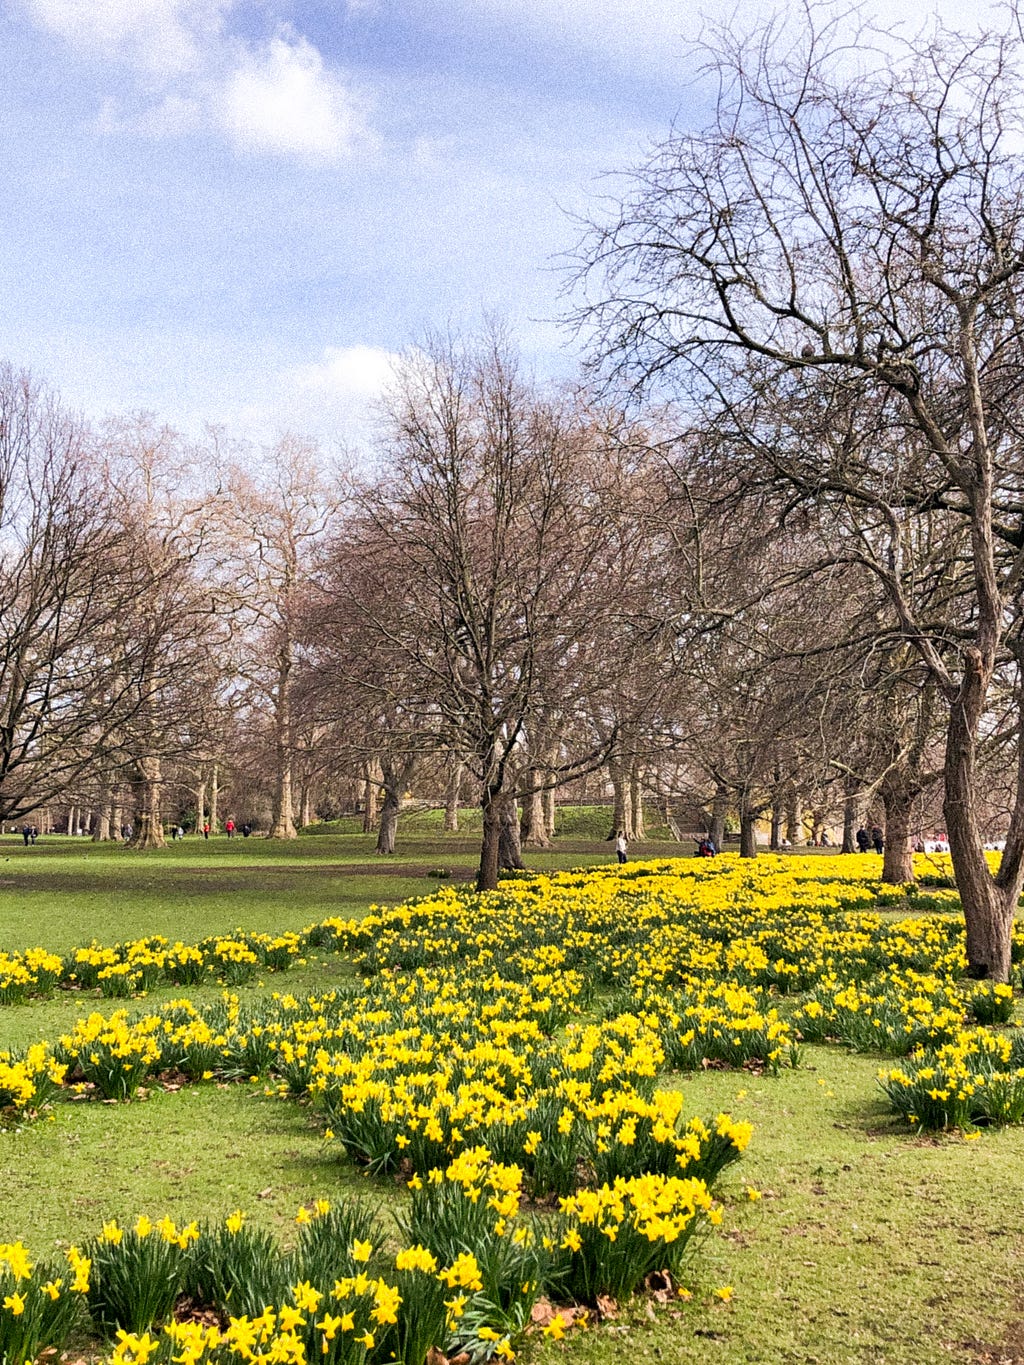 a sea of bright yellow daffodils in the foreground. behind them are bare trees stretching back, and a gentle blue sky dotted with clouds. lines of people who appear as small as ants weave through the trees far into the distance.